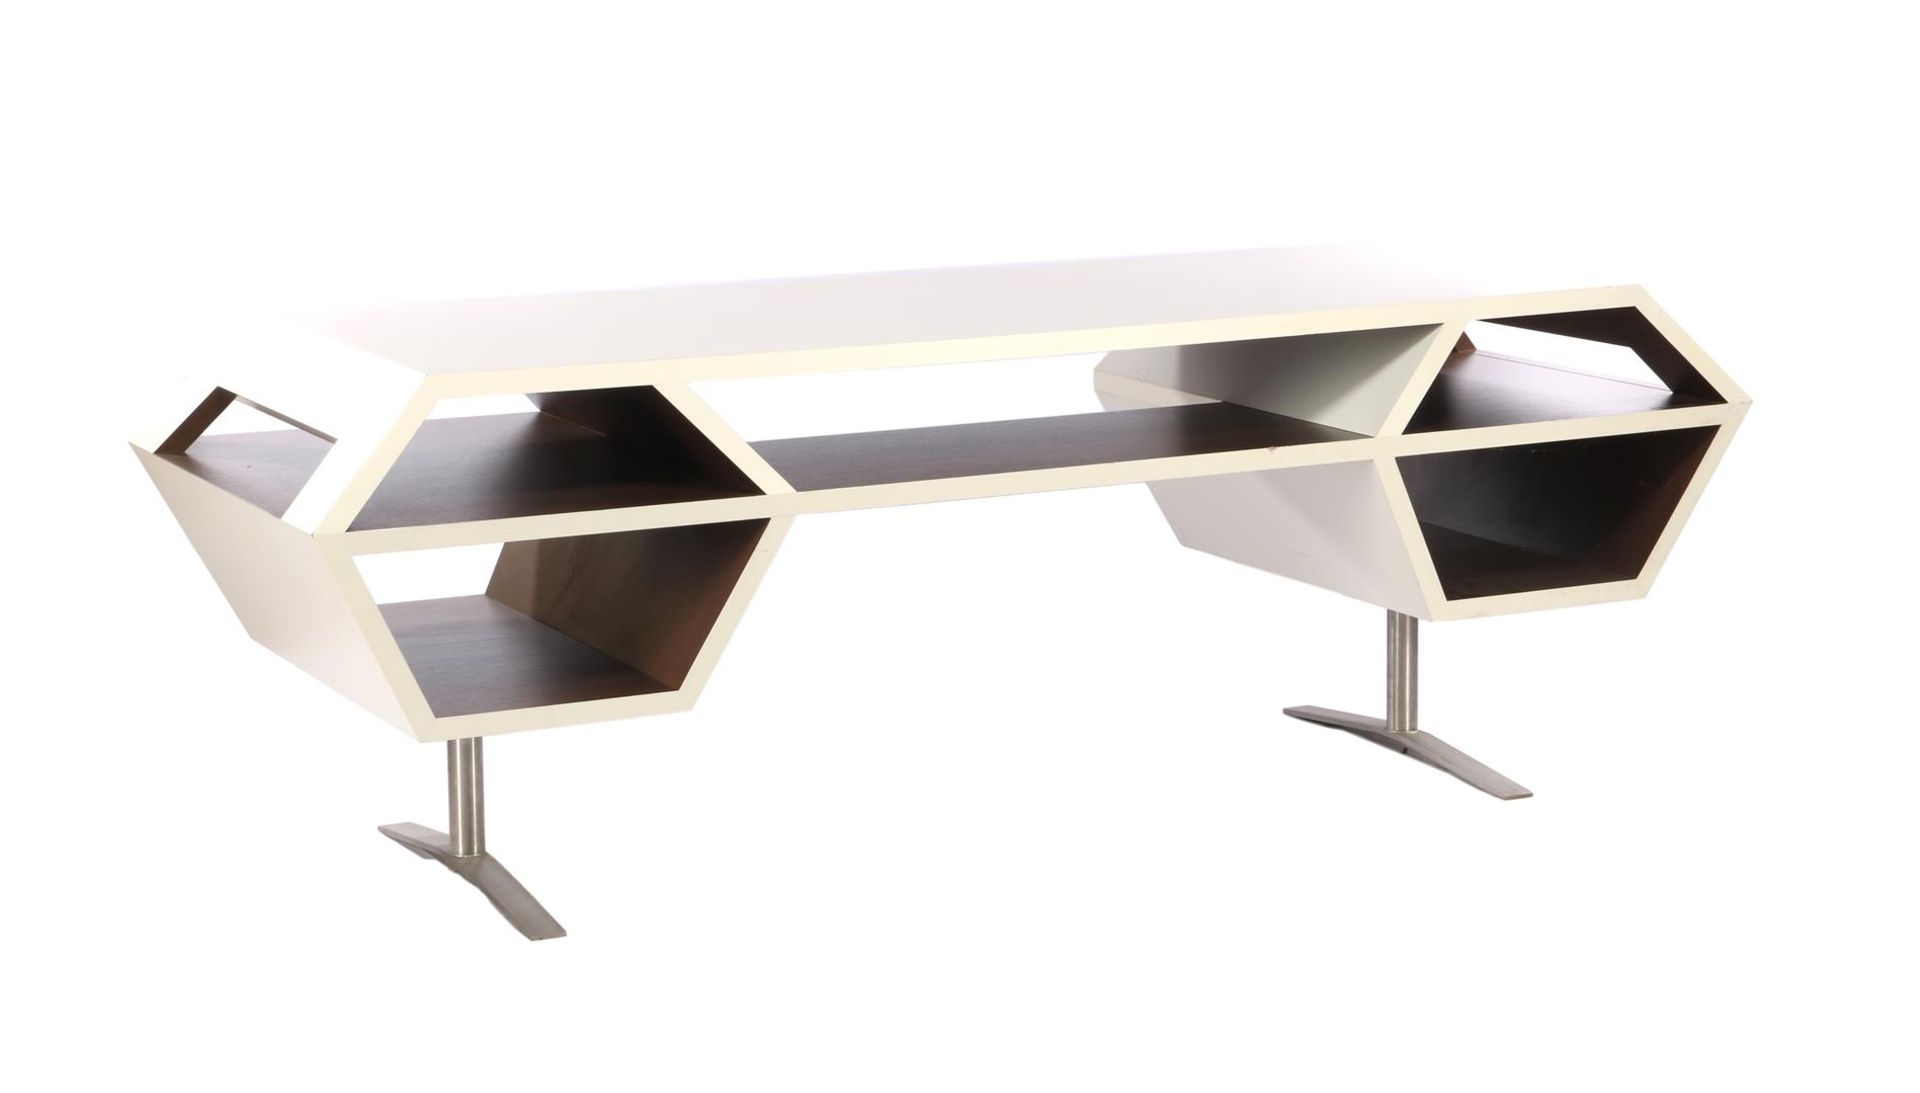 White / brown wooden modern design desk on metal legs, in Space Age style, made as a graduation